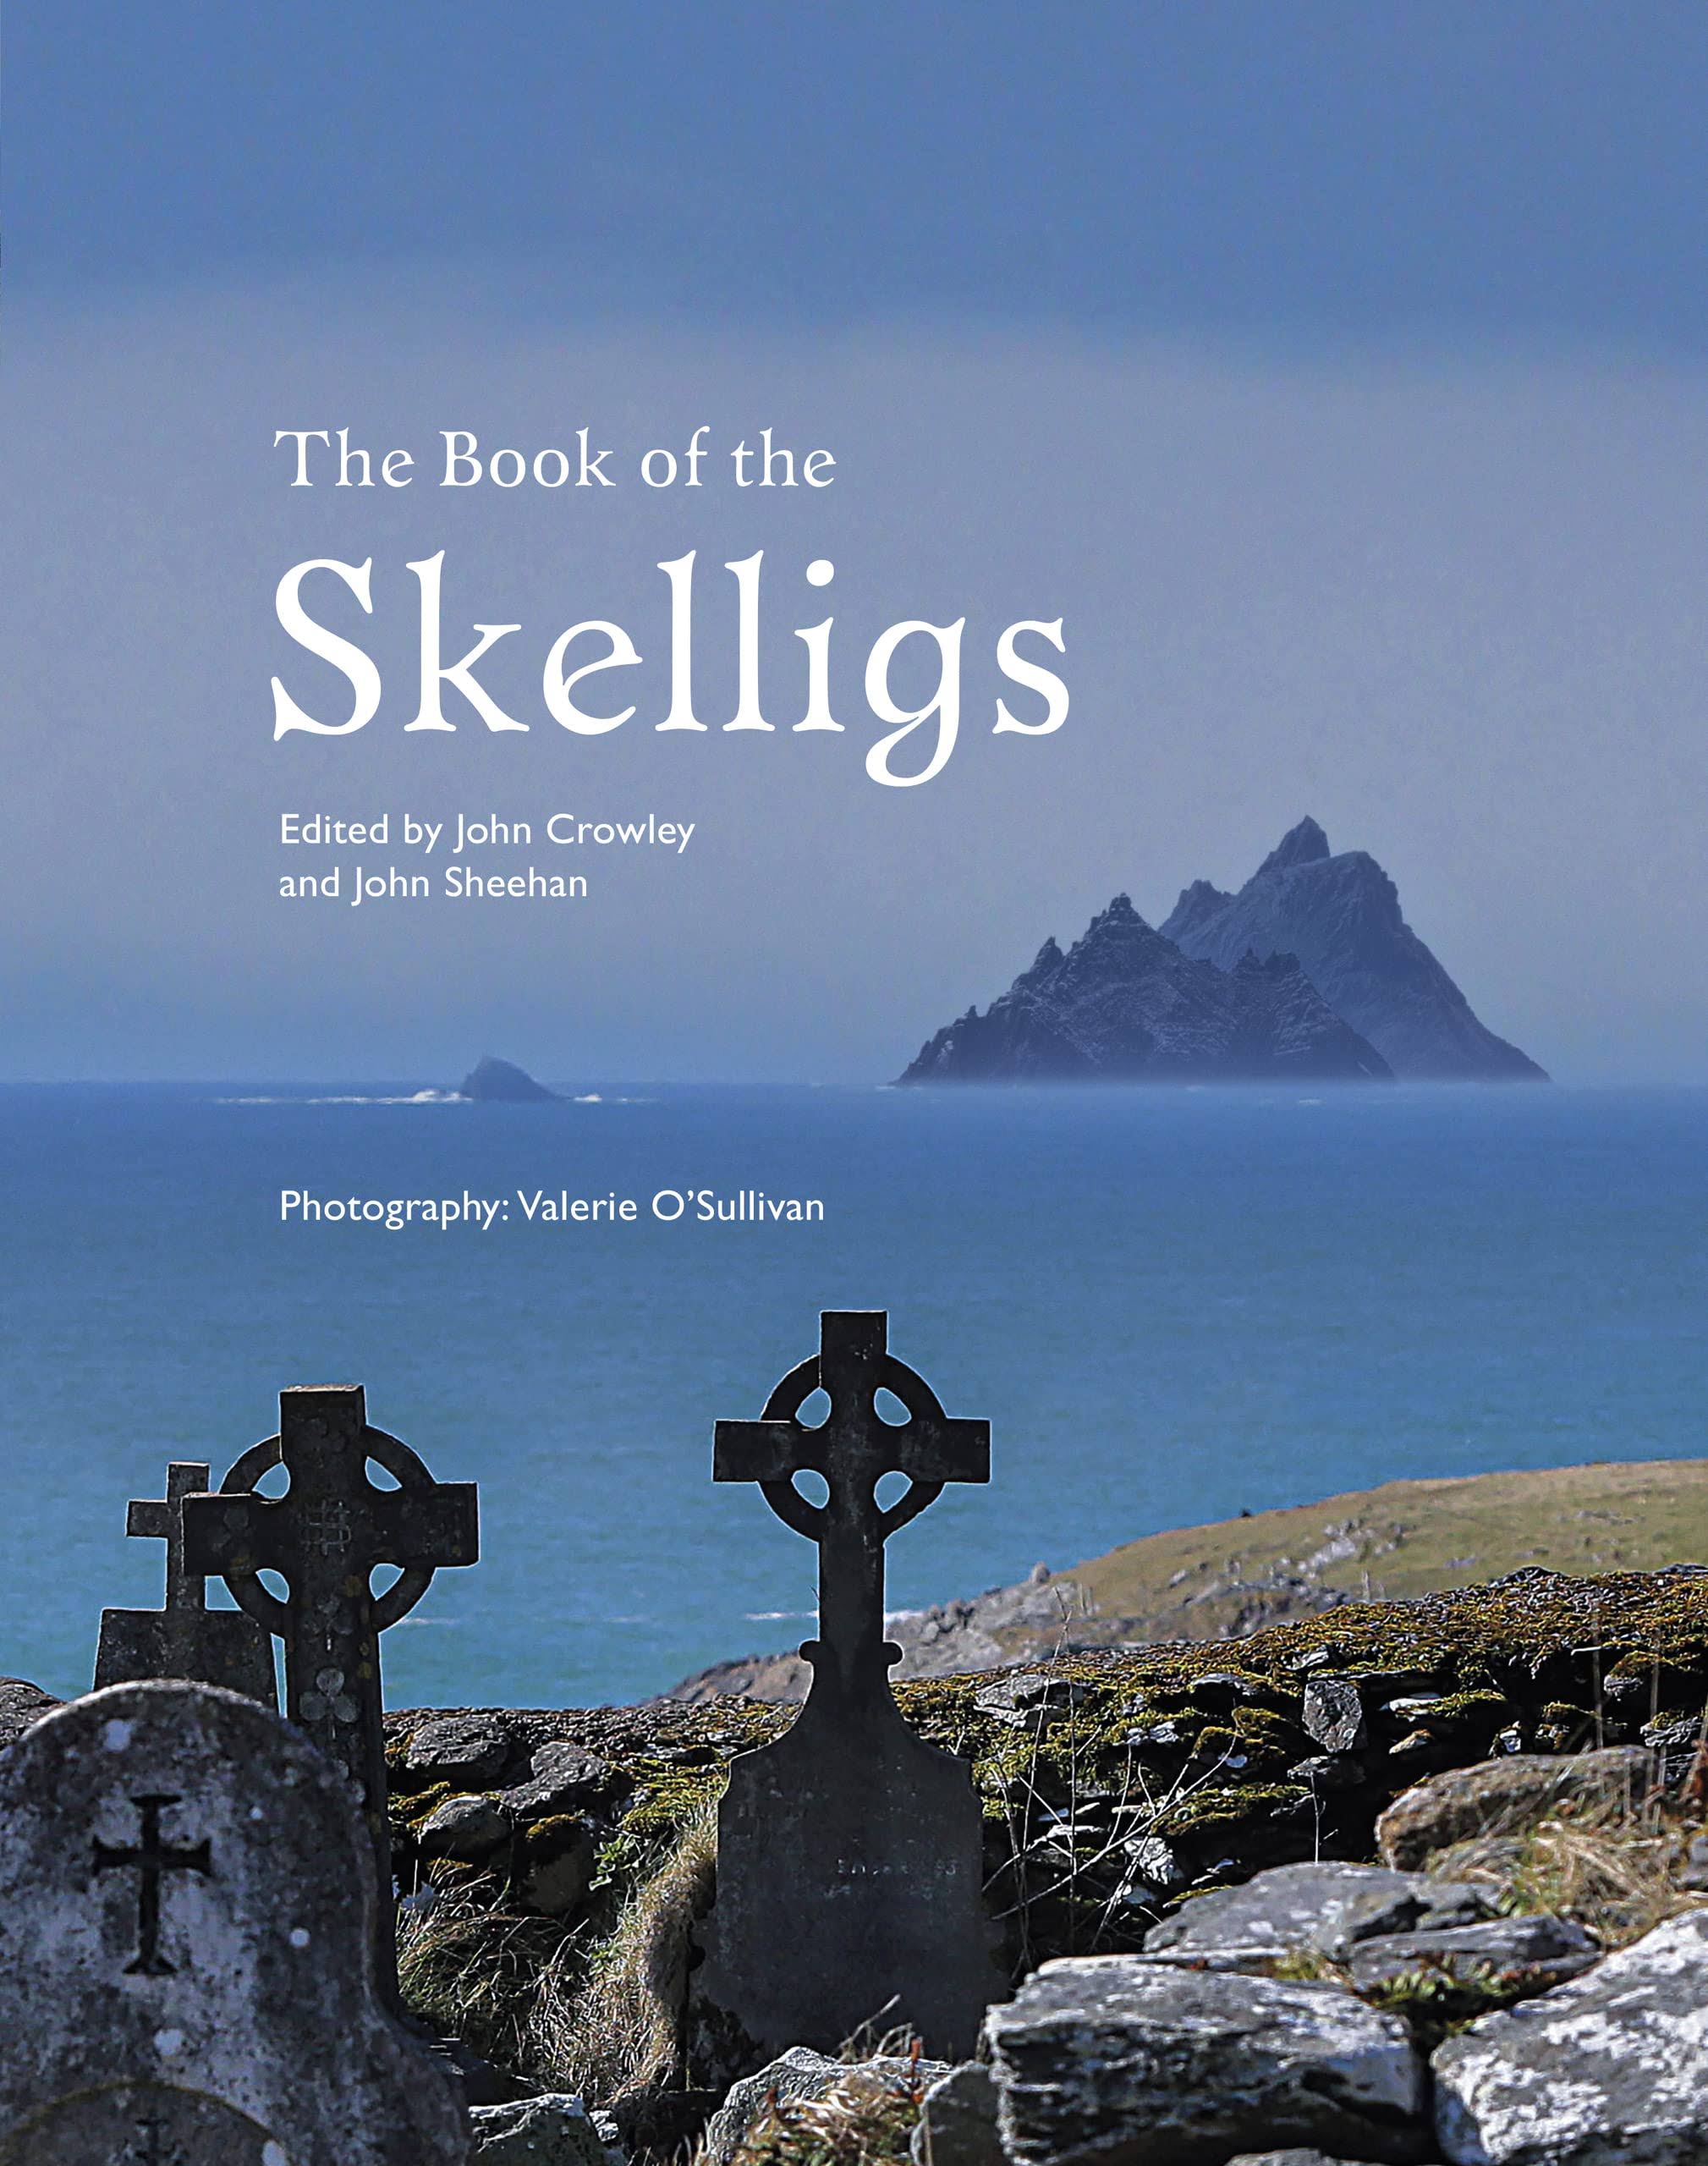 The Book of The Skelligs by John Crowley